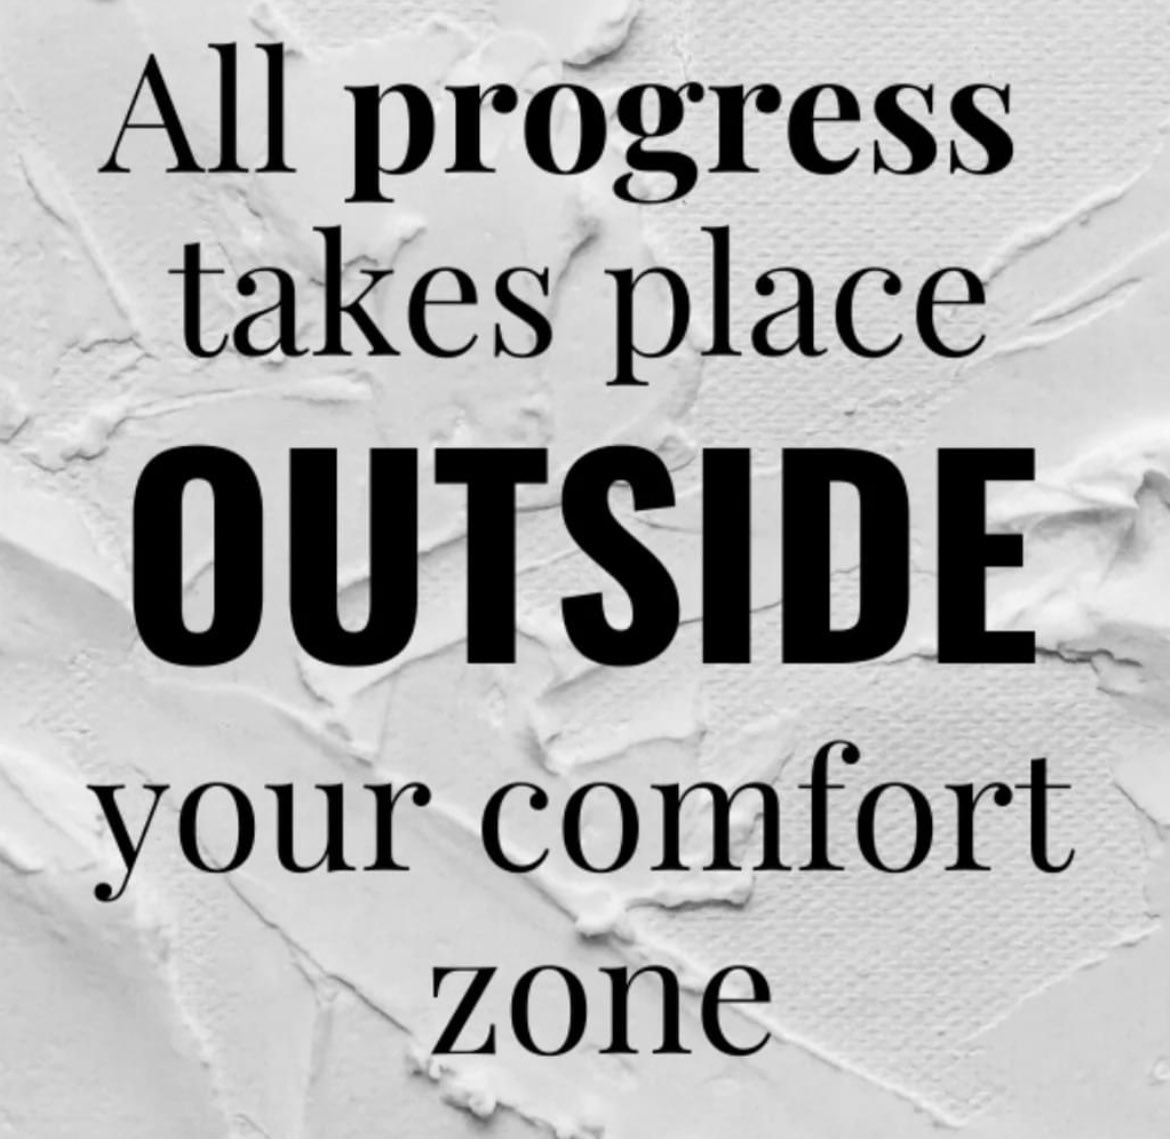 Happy Monday! Time to put your best foot forward and get out of your comfort zone. 👍🏻